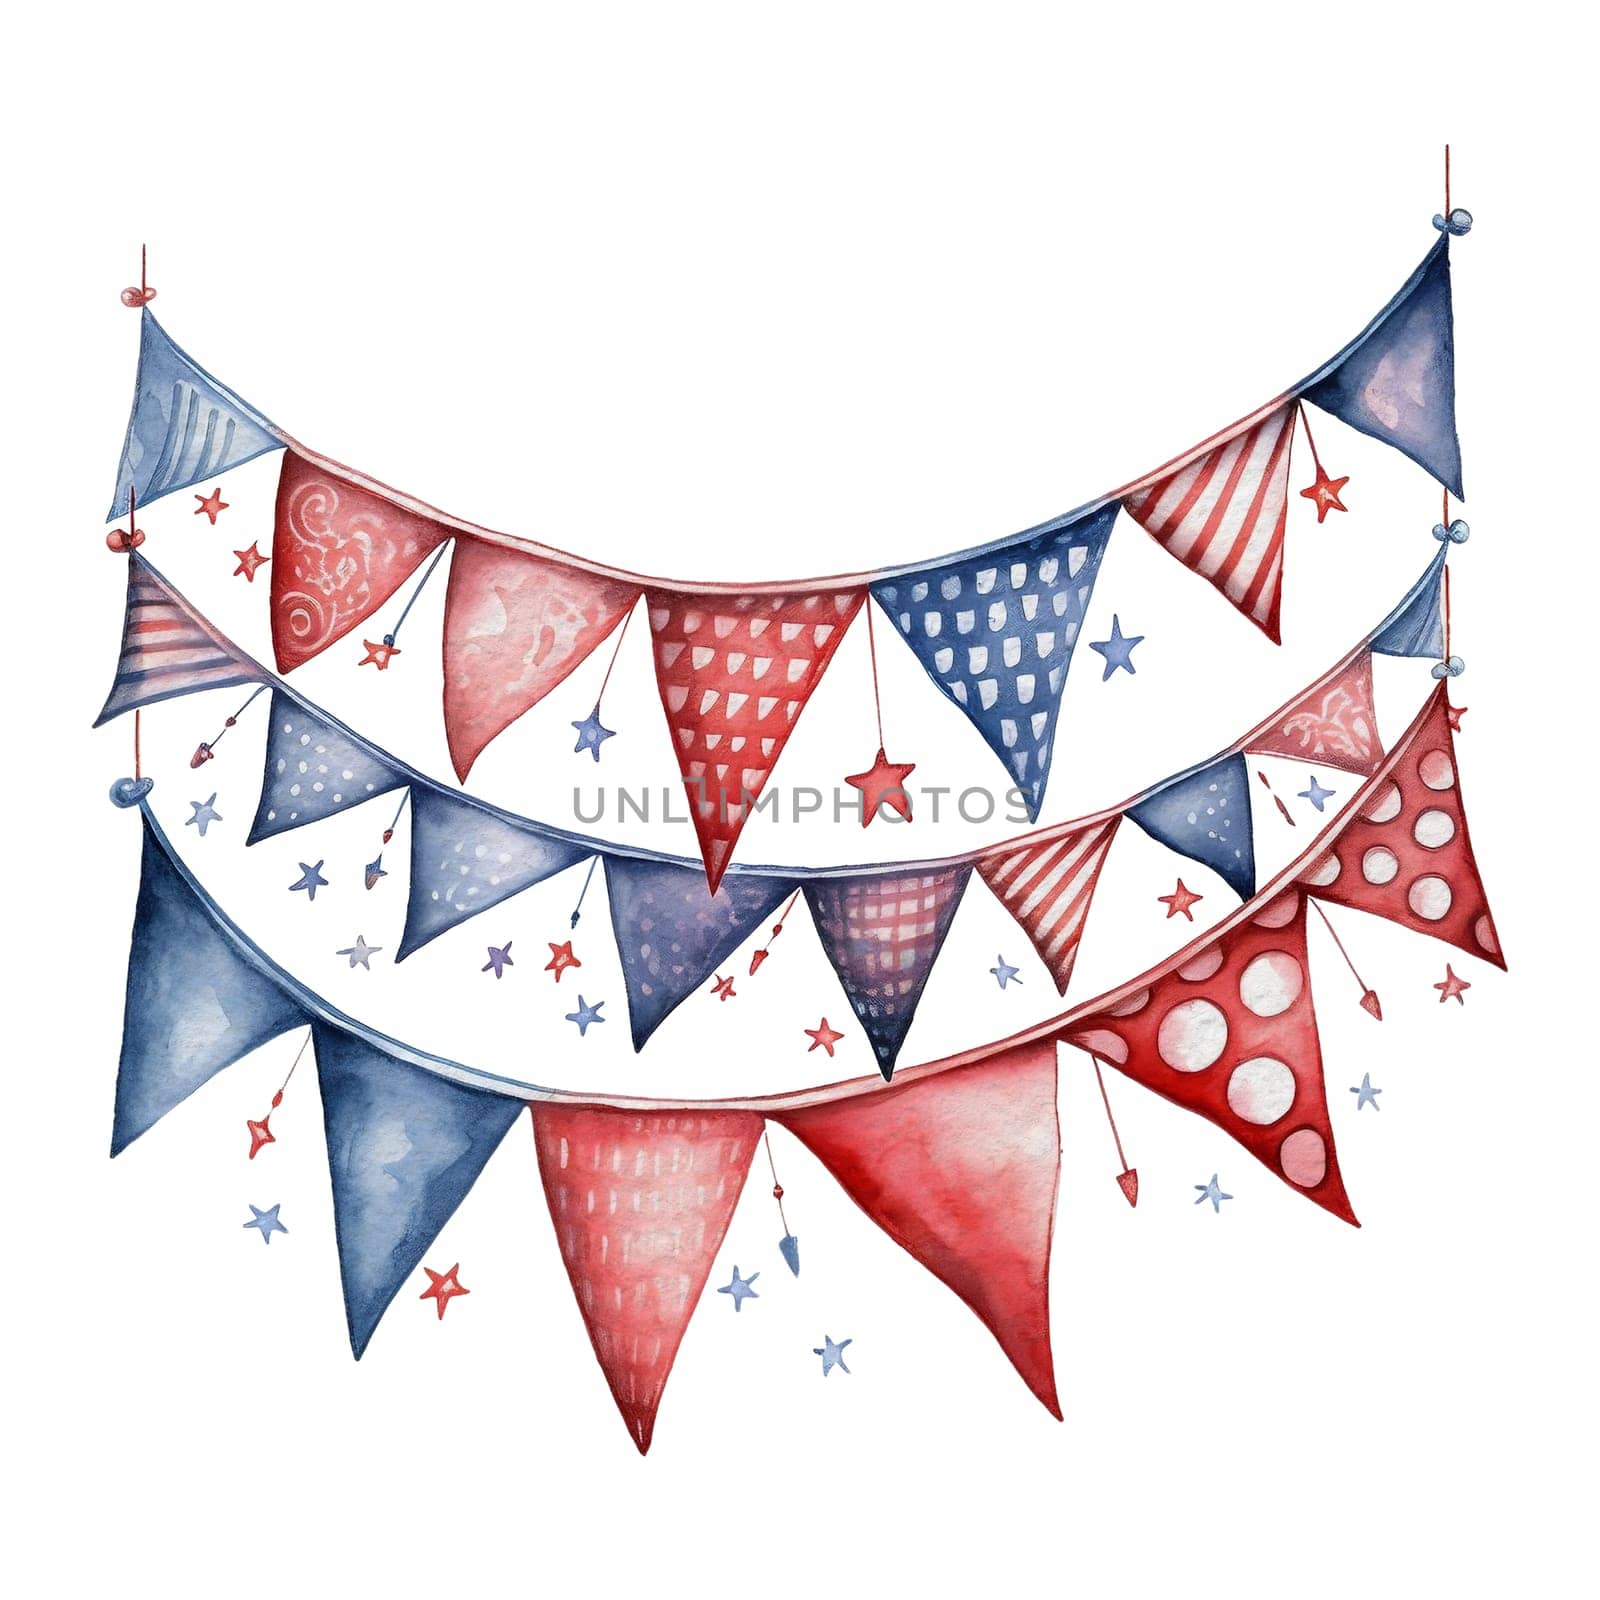 Cozy farmhouse decoration party flags Illustration Clipart.
Isolated fourth of July element on white background for Independence Day sublimation design.